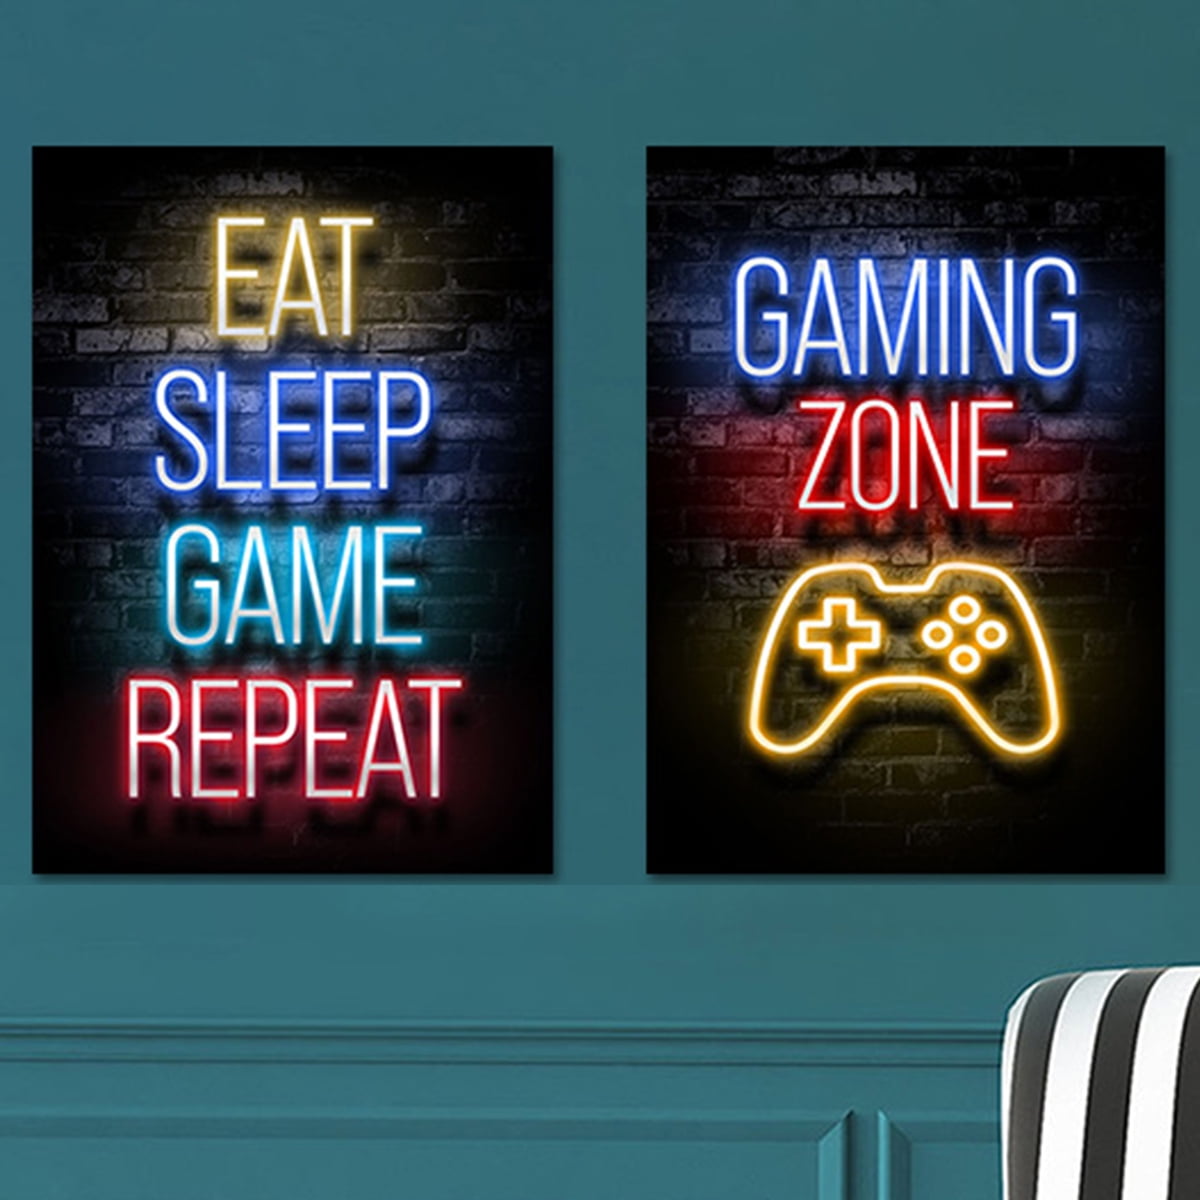 Neon Video Game Accessories Pattern Wall Mural